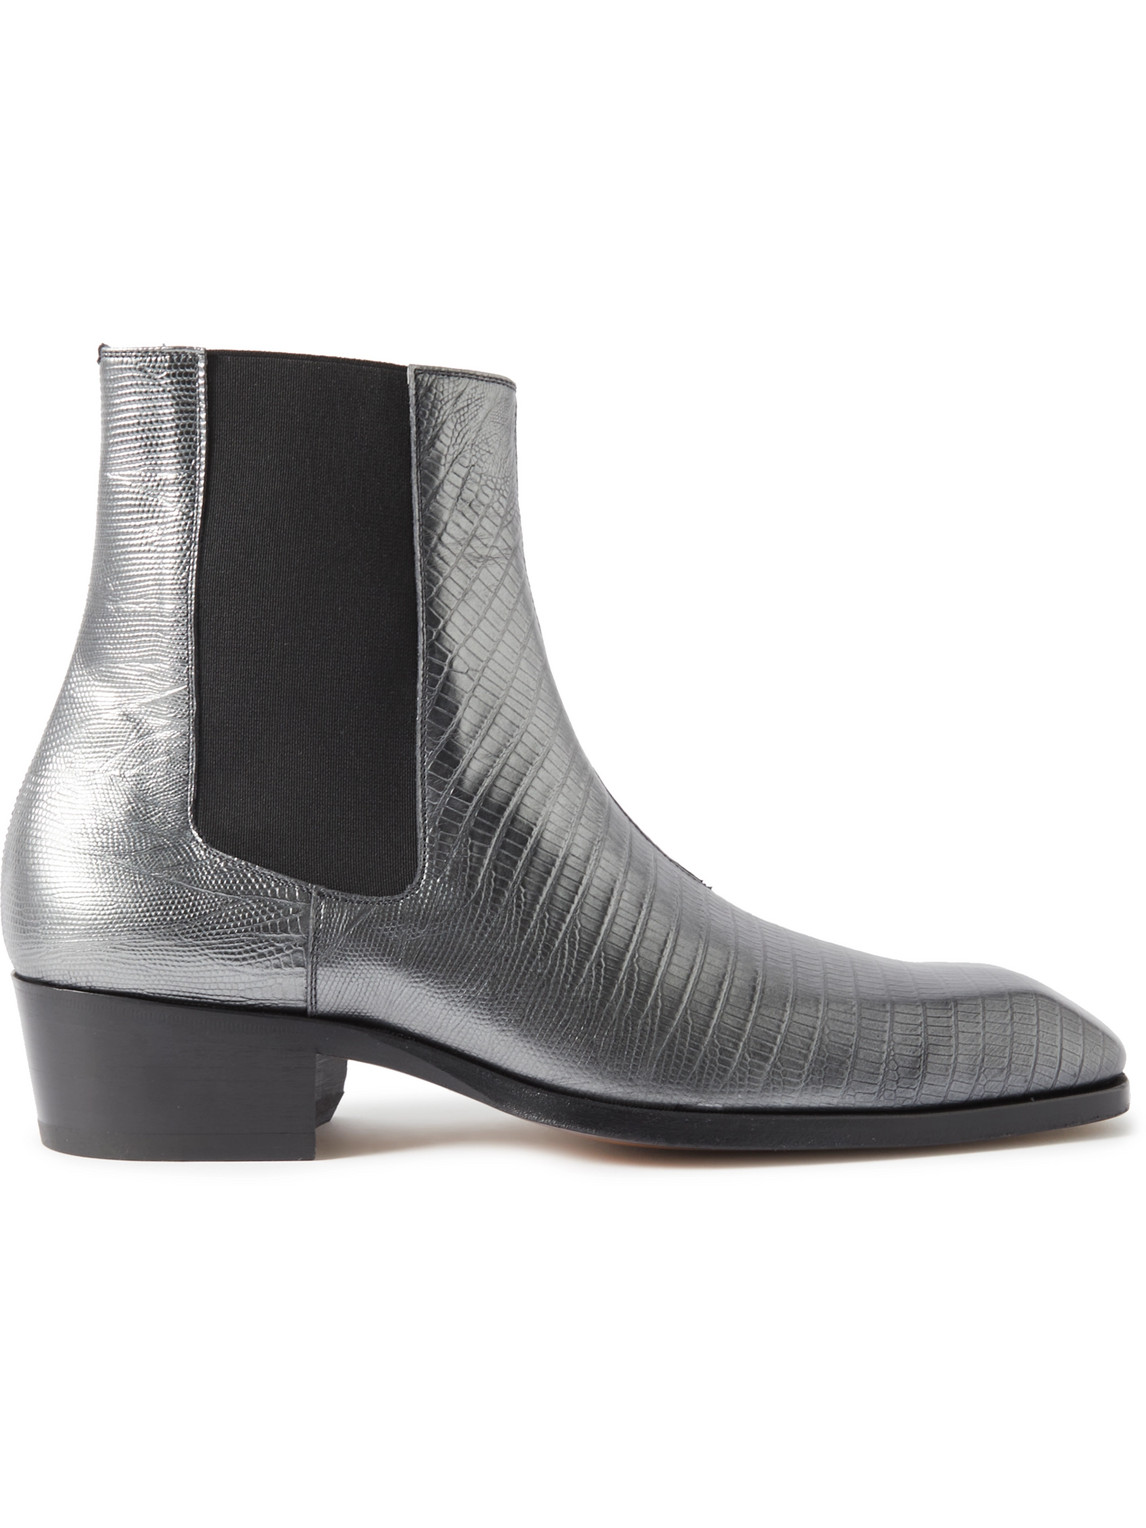 TOM FORD - Tejus Bailey Metallic Lizard-Effect Leather Chelsea Boots - Men - Silver - UK 12 von TOM FORD